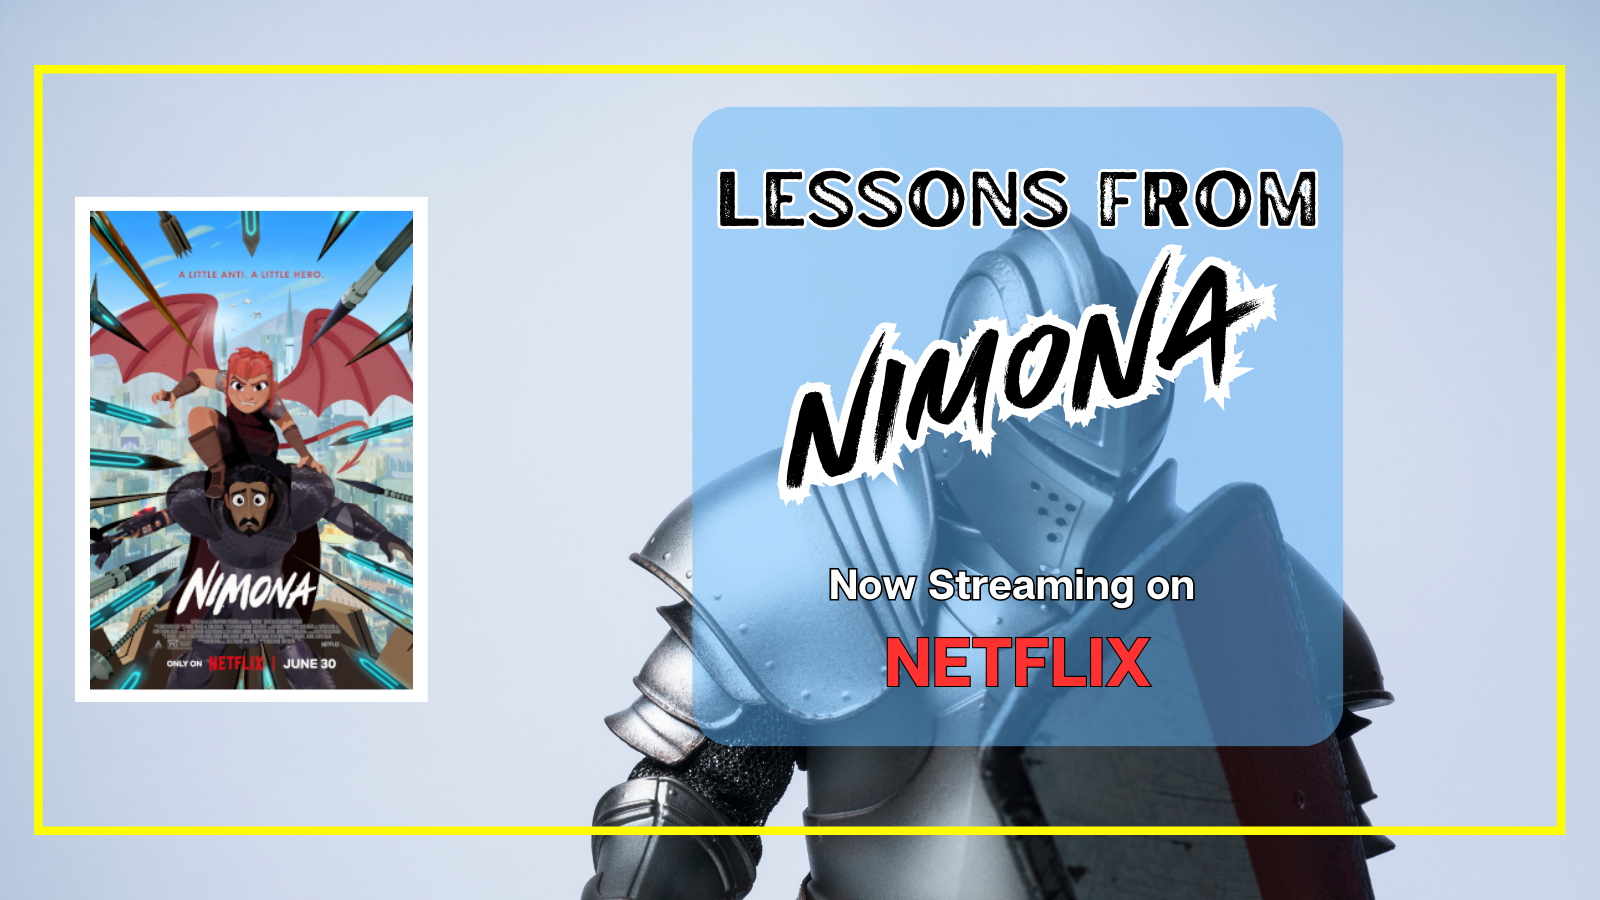 Lessons from Nimona